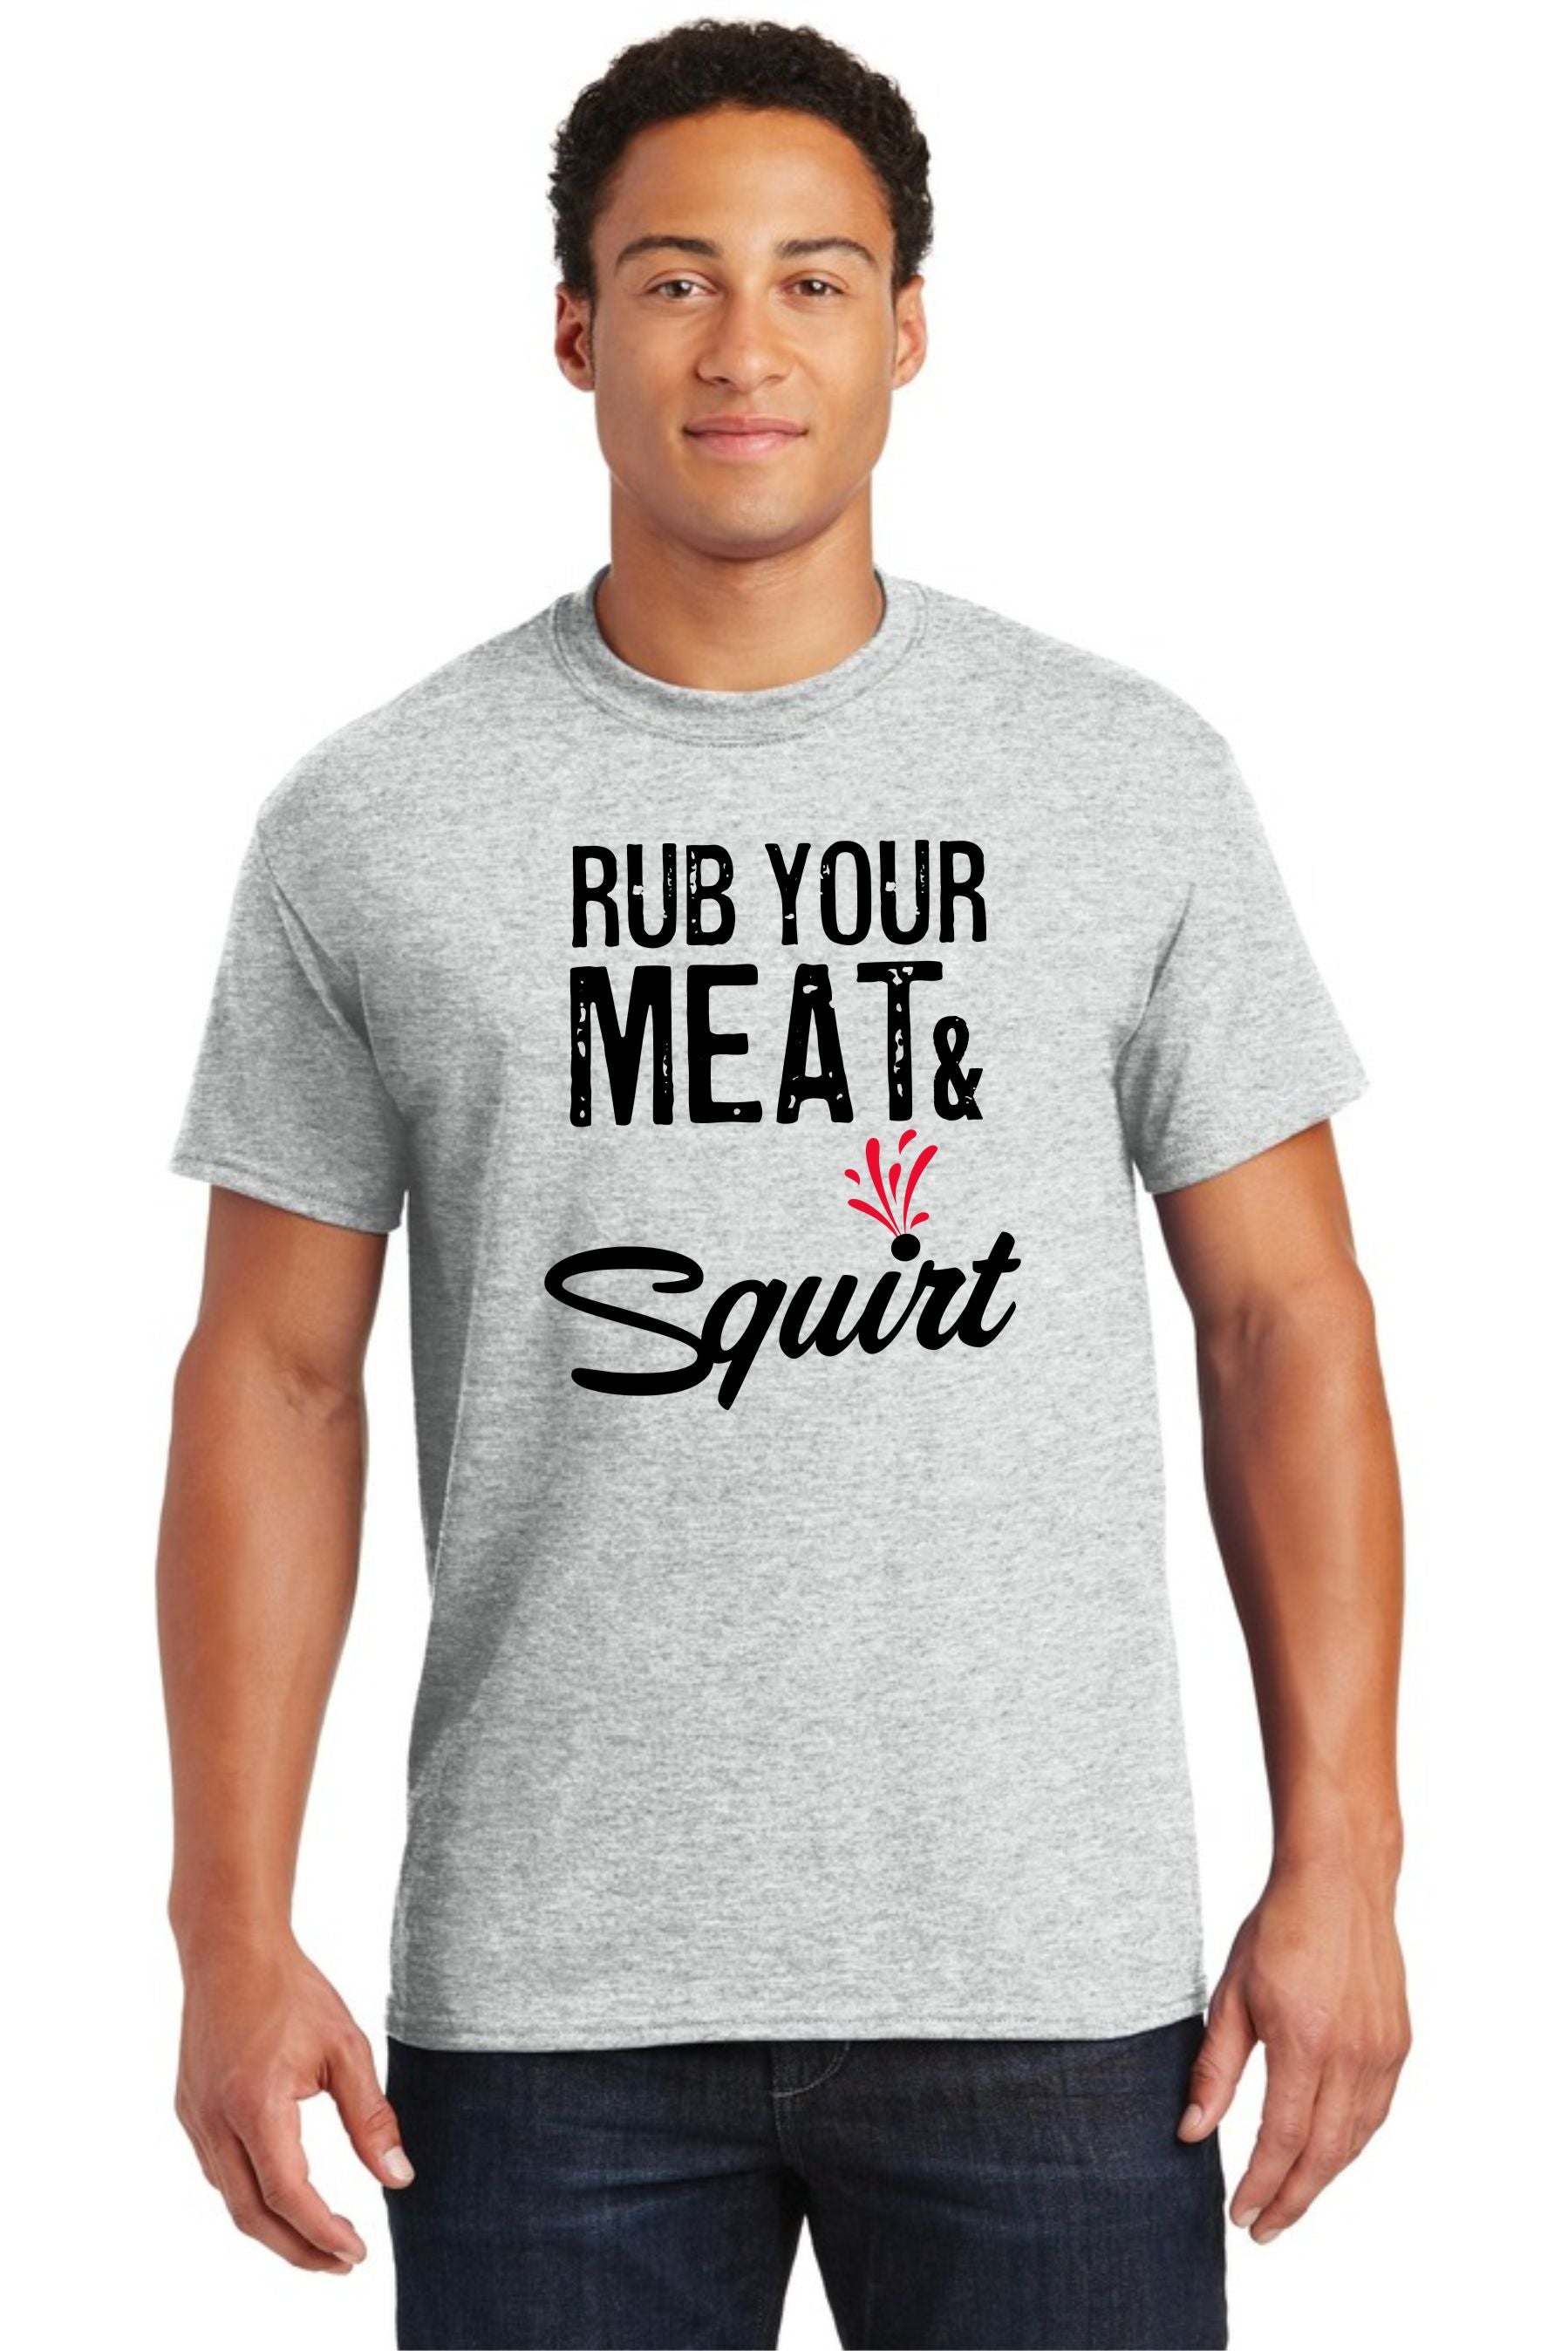 RUB YOUR MEAT & SQUIRT *NEW*